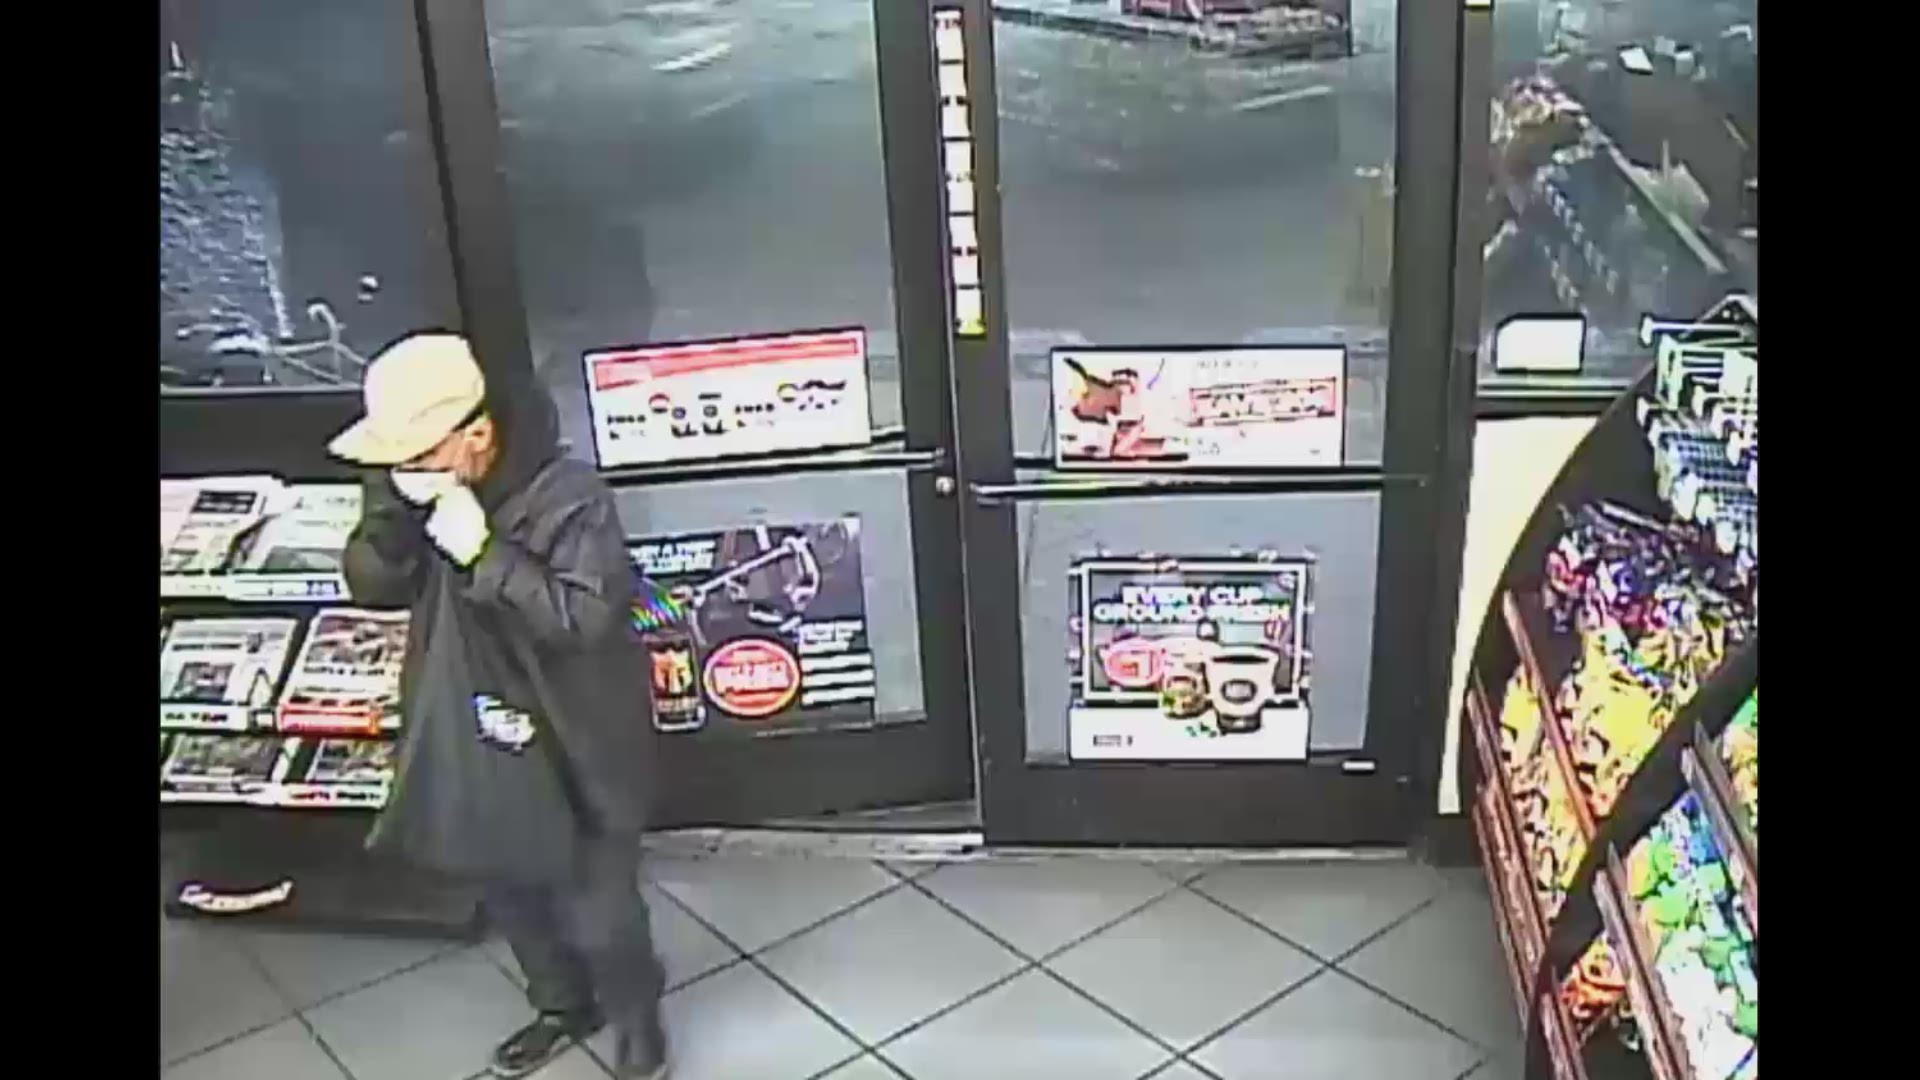 The Phoenix Police Department is asking for tips to find the suspect who robbed a convenience store at gunpoint last month.